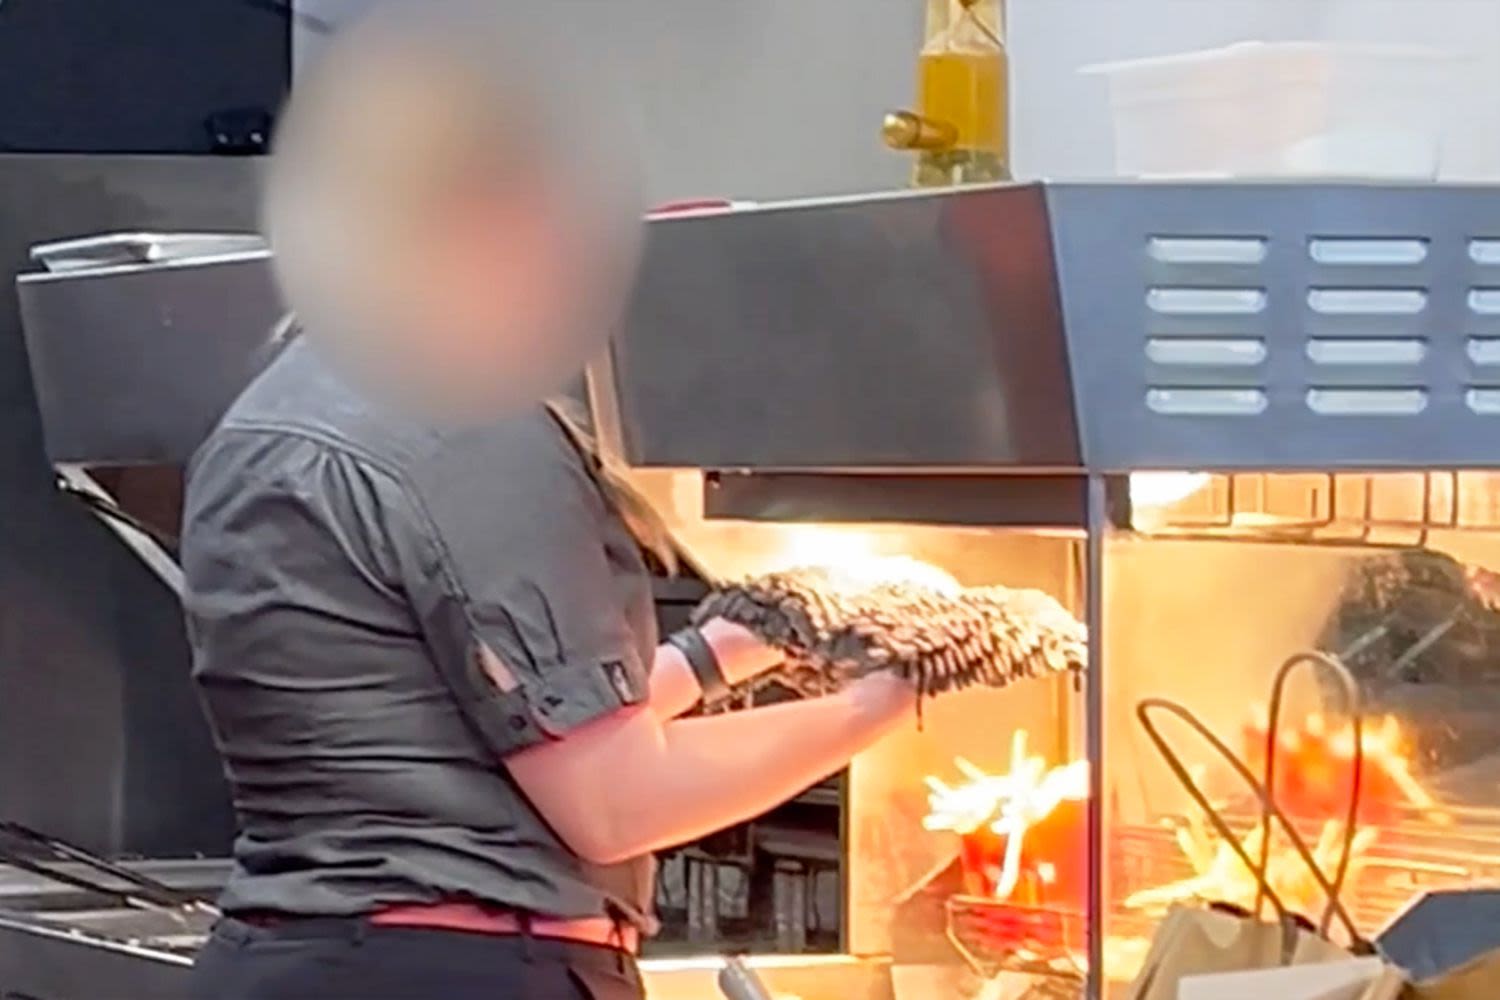 McDonald’s Worker Seen Drying a Dirty Mop Under the French Fry Warmer: ‘McMop’